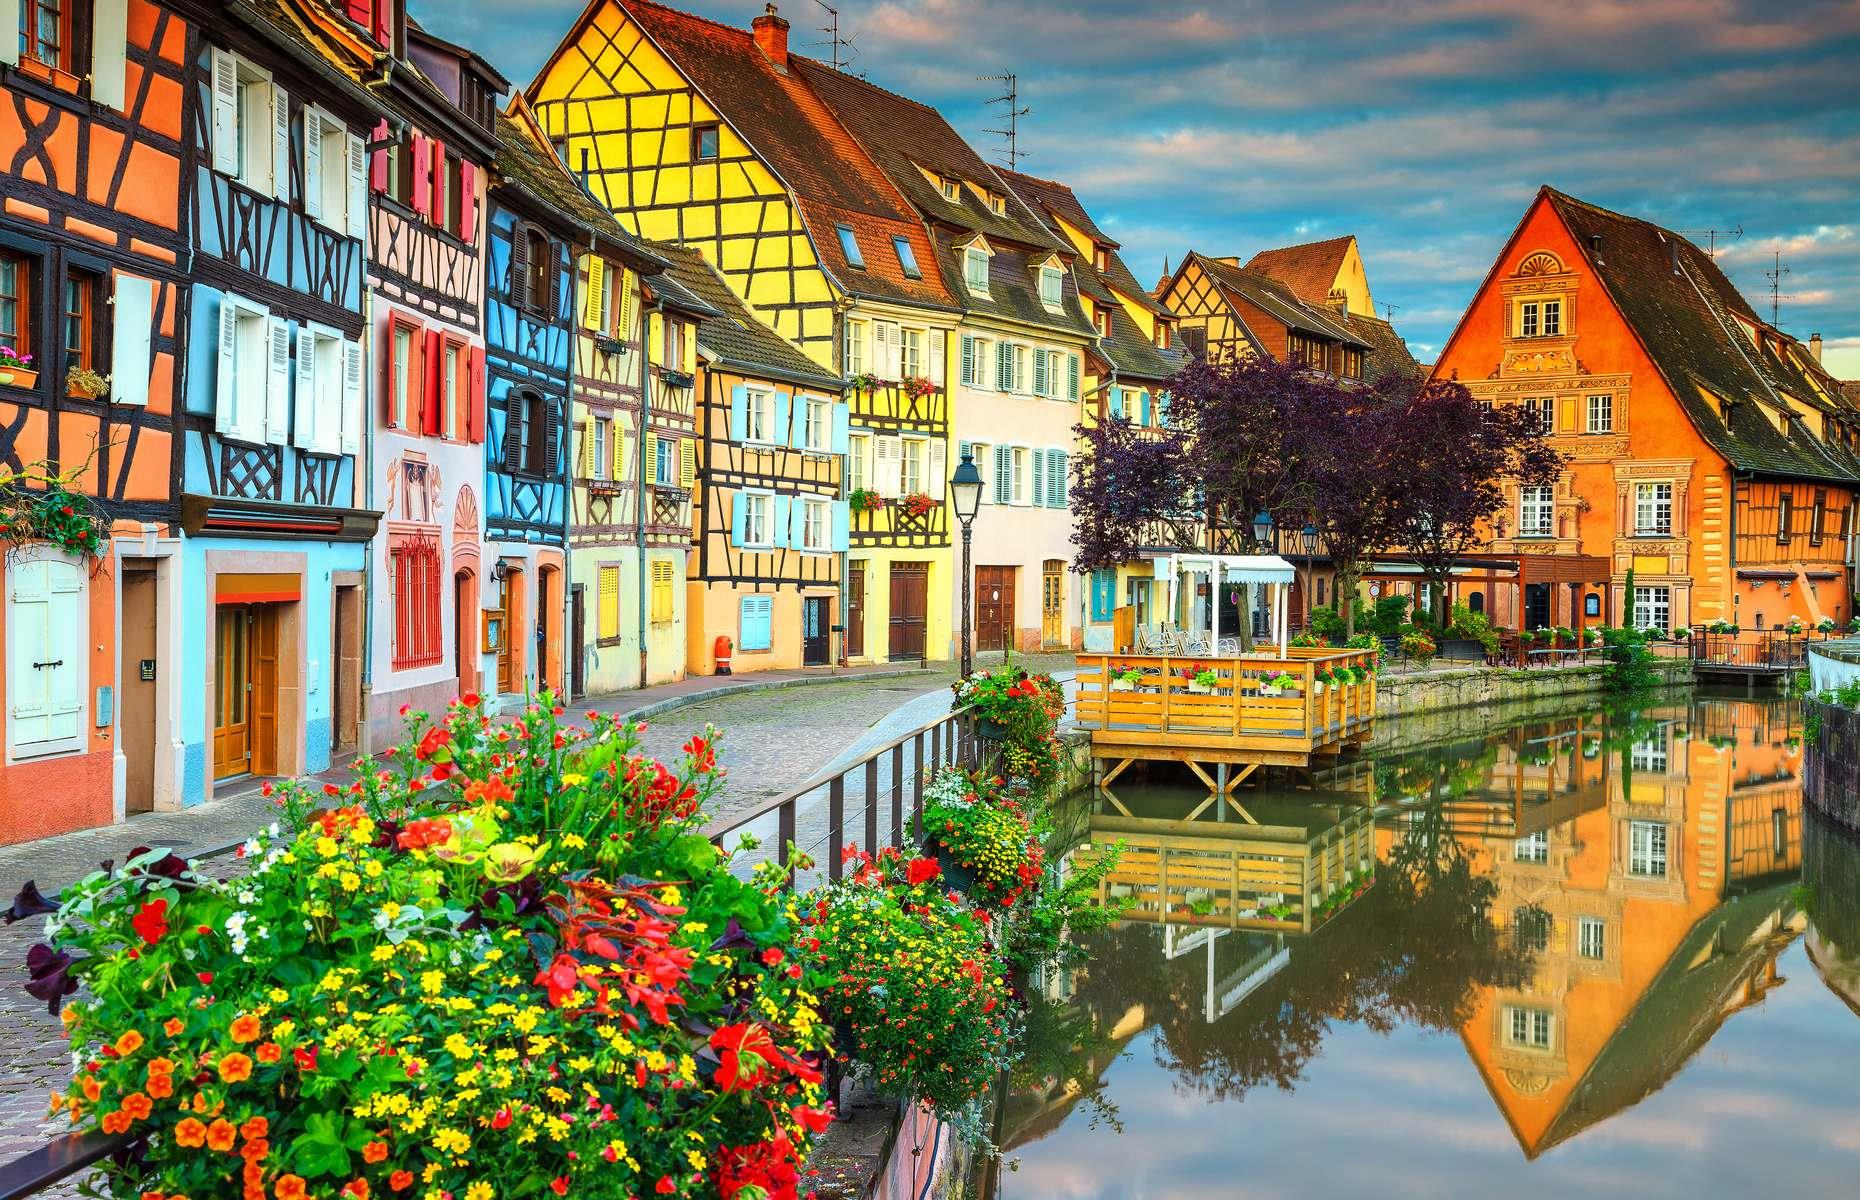 <p>Some argue that Colmar is the most beautiful city in Europe – and they could be right. This picture-perfect place lies in the Alsace region of France, south of Strasbourg, and is first mentioned in records around AD 823. By the 1200s, Colmar had become prosperous due to its location on the wine trade routes, with the rivers Lauch and Thur providing easy access. Colmar’s brightly colored half-timbered houses, quaint streets and ornate market squares give the feeling you really have stepped back in time.</p>  <p><strong>Read on to see <a href="https://www.loveexploring.com/galleries/103353/the-worlds-most-beautiful-walled-towns-and-cities?page=1">the world's most beautiful walled towns and cities</a></strong></p>